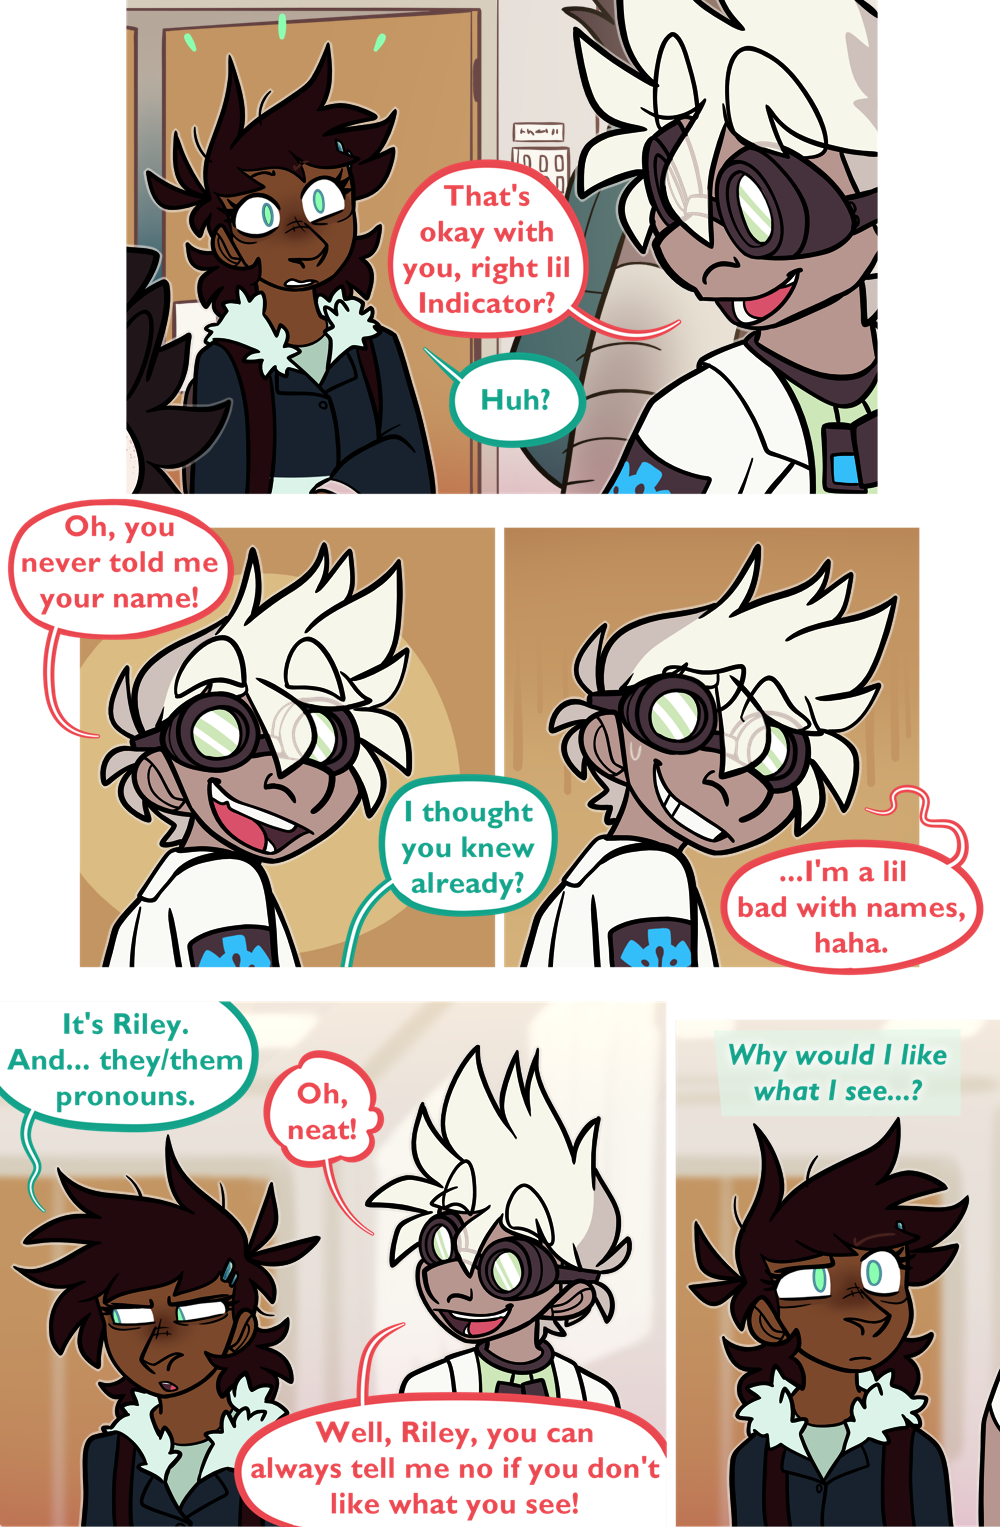 Ch4 Page 8